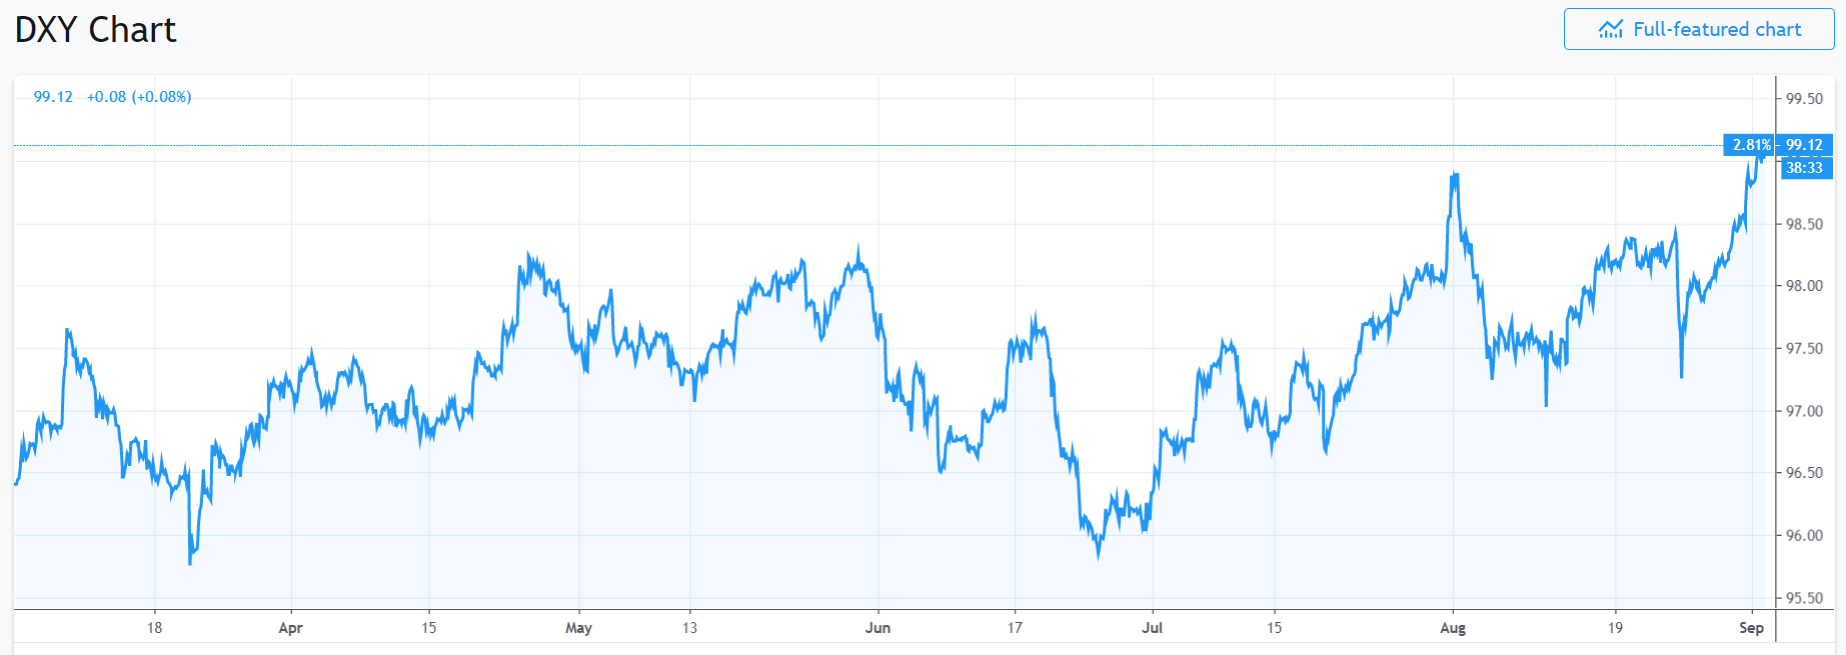 TRADING VIEW - USD DXY CHART - 3 SEPT 2019